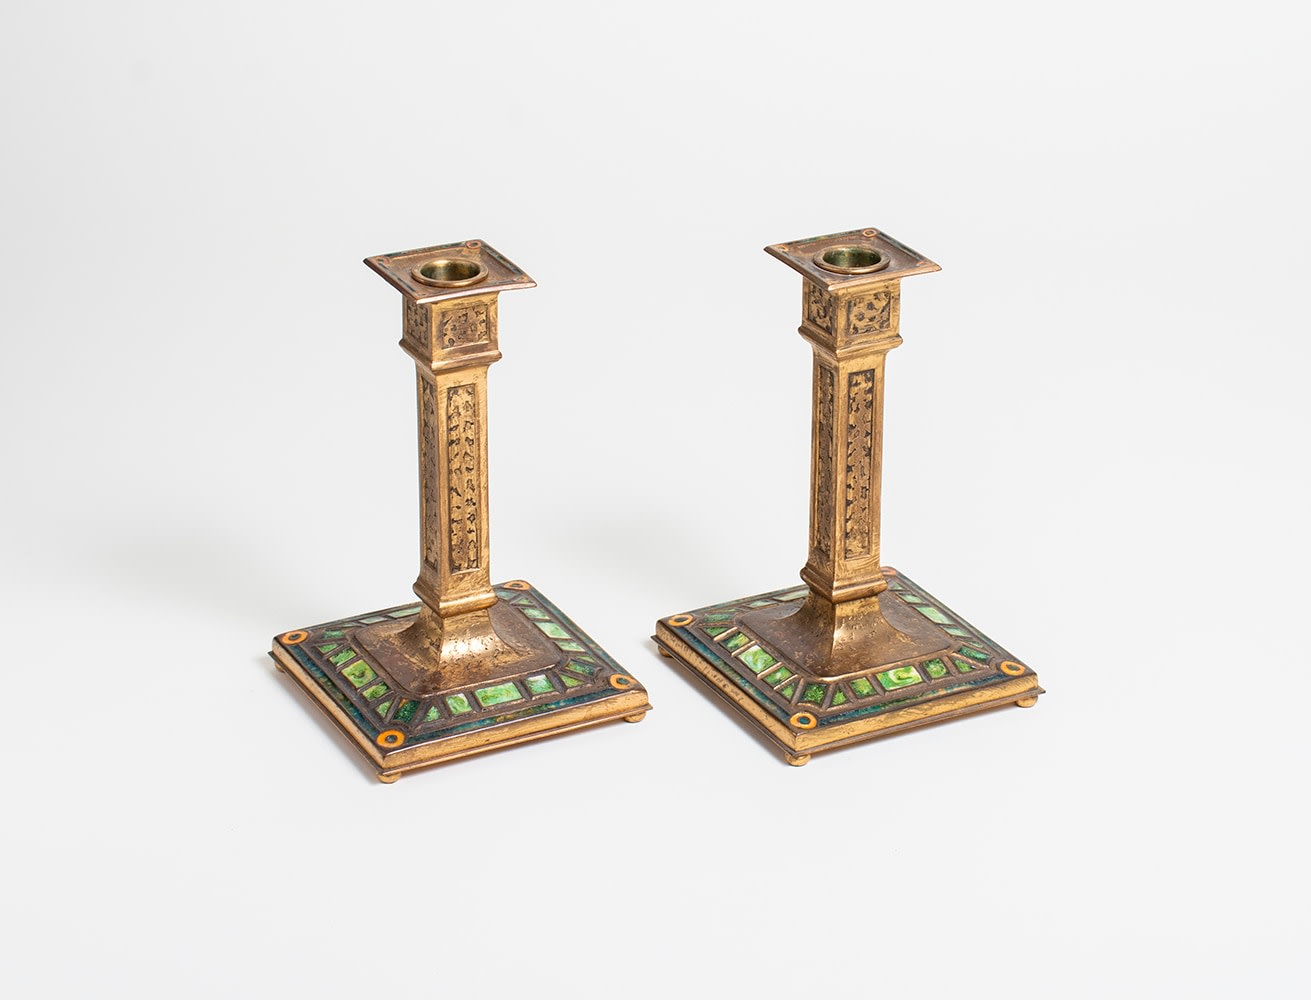 a pair of bronze candlesticks by louis comfort tiffany furnaces inc in the &quot;art deco&quot; pattern known for rectilinear recessed decoration filled with enamel, in this example the enamel is variegated green